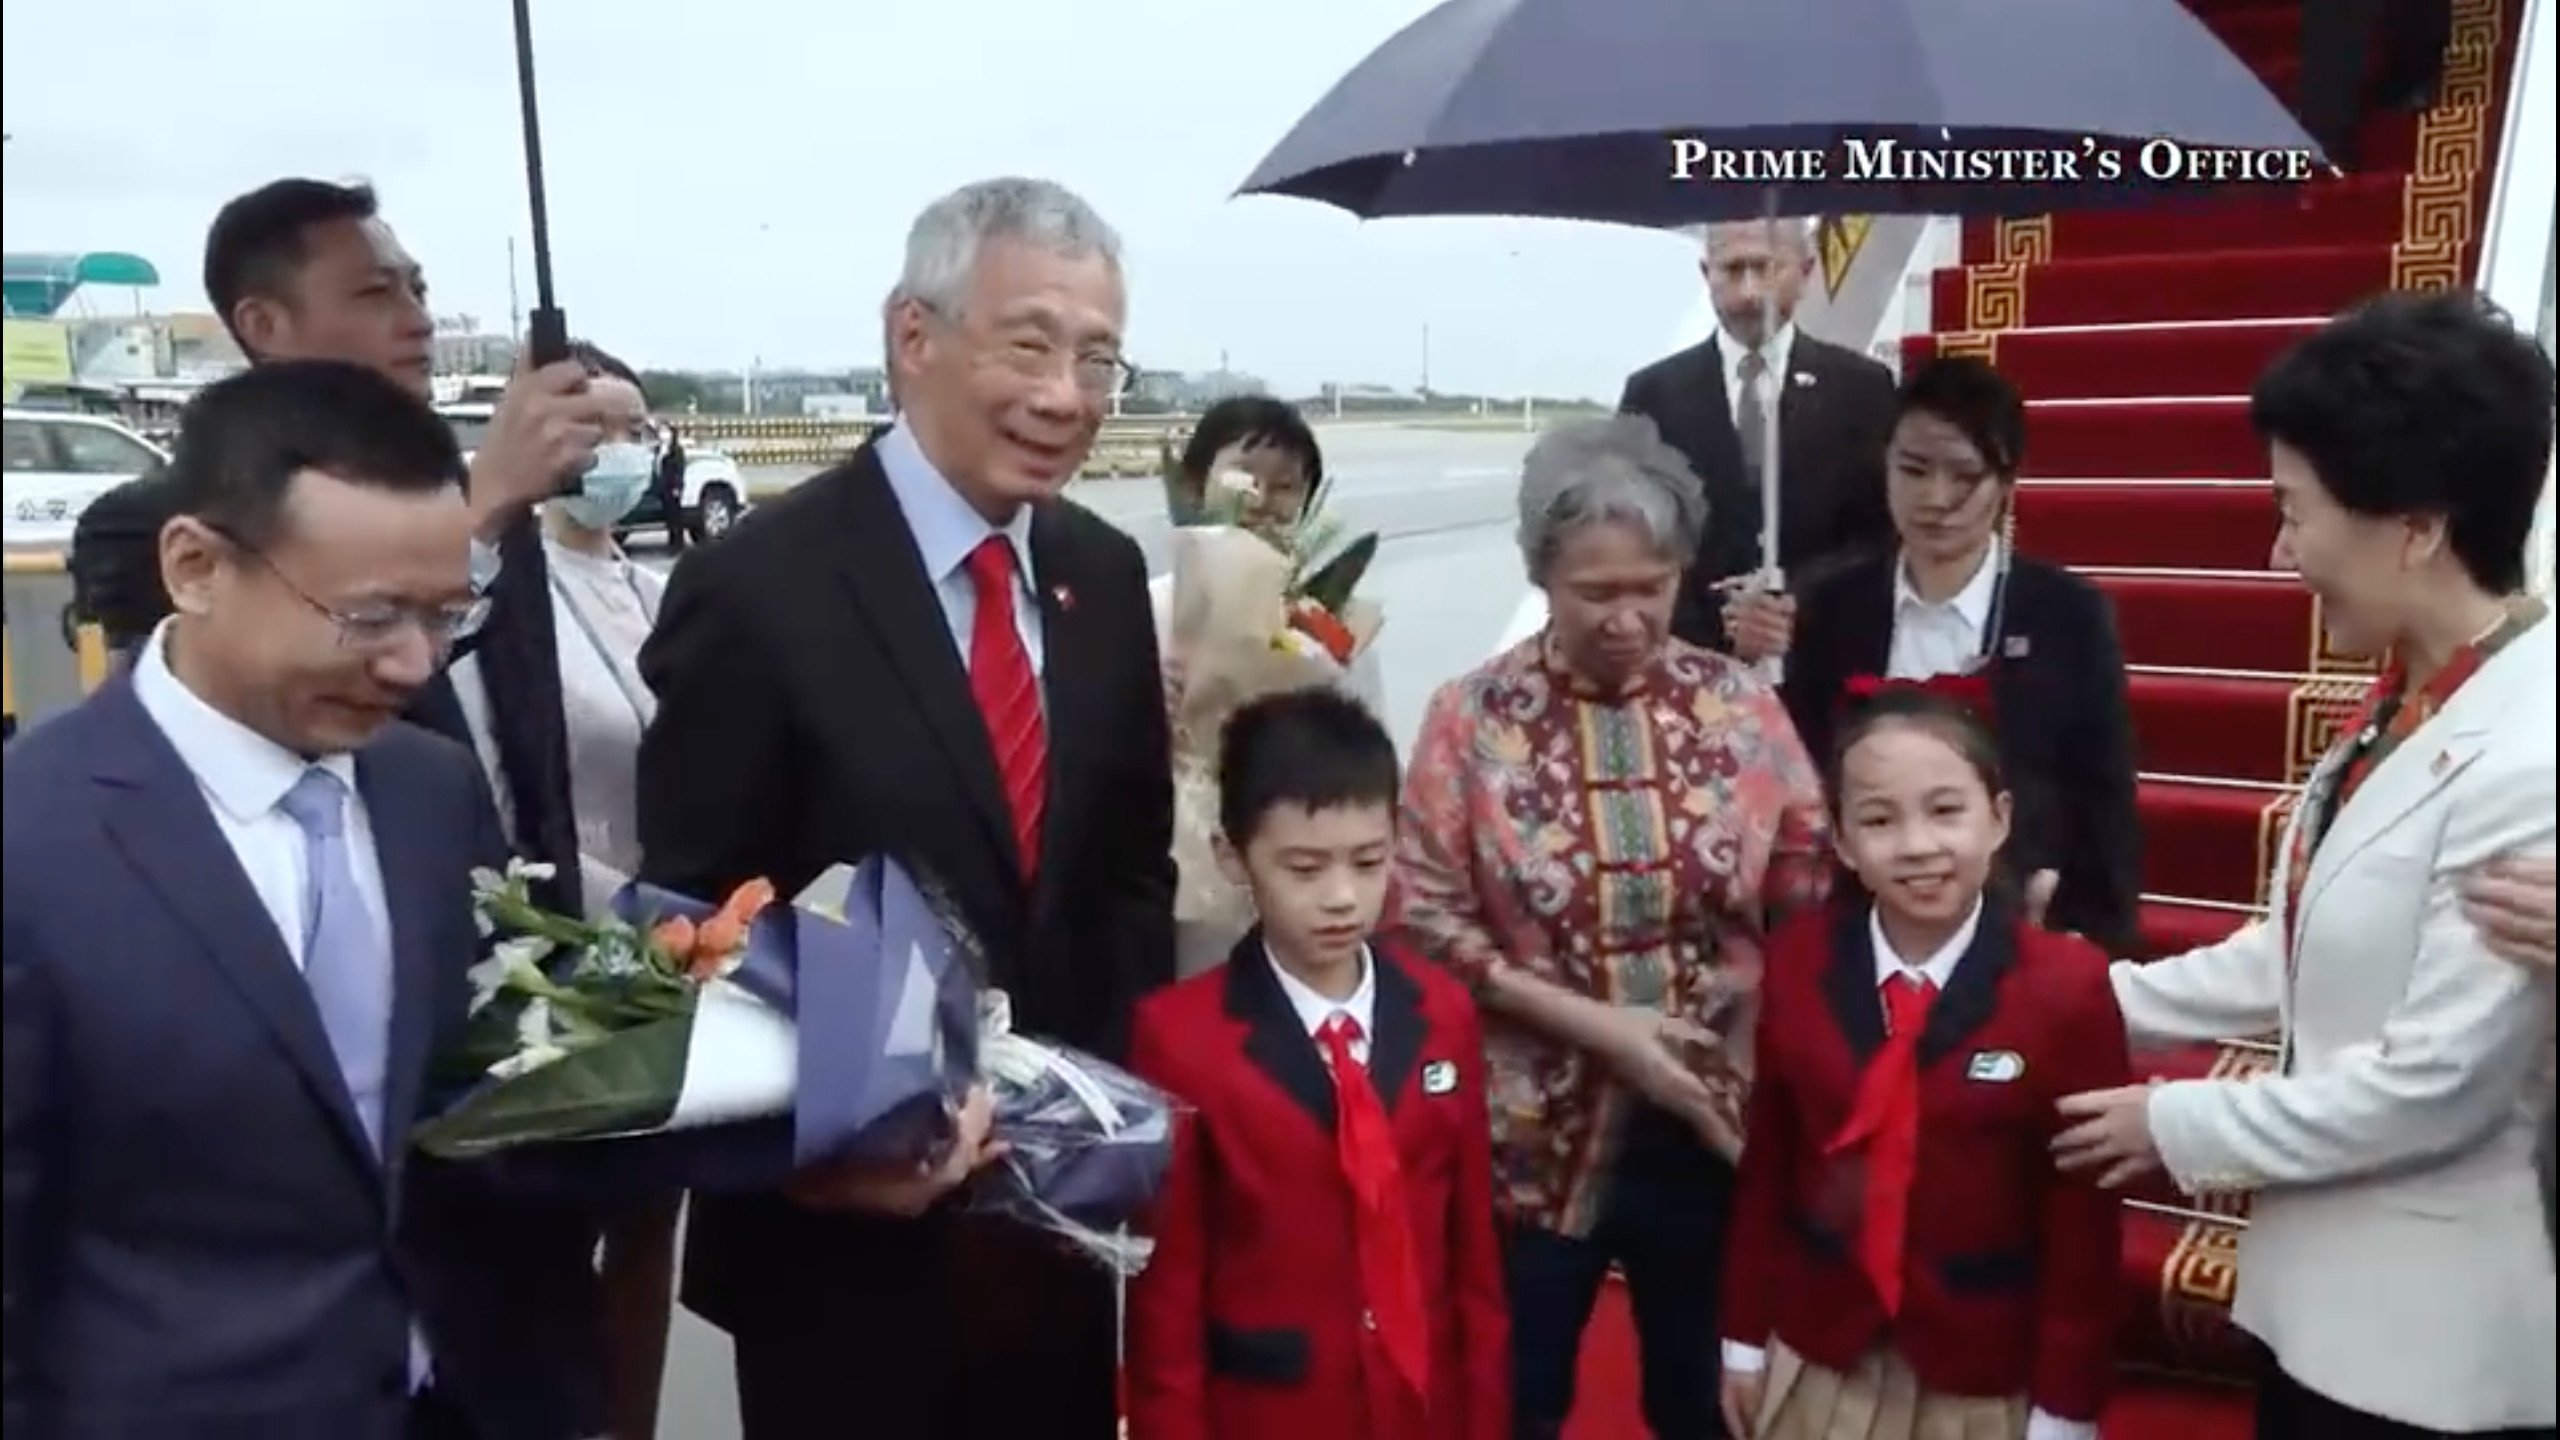 Singapore’s Prime Minister Lee Hsien Loong has arrived in Guangzhou for a six-day visit to China. Photo: Handout